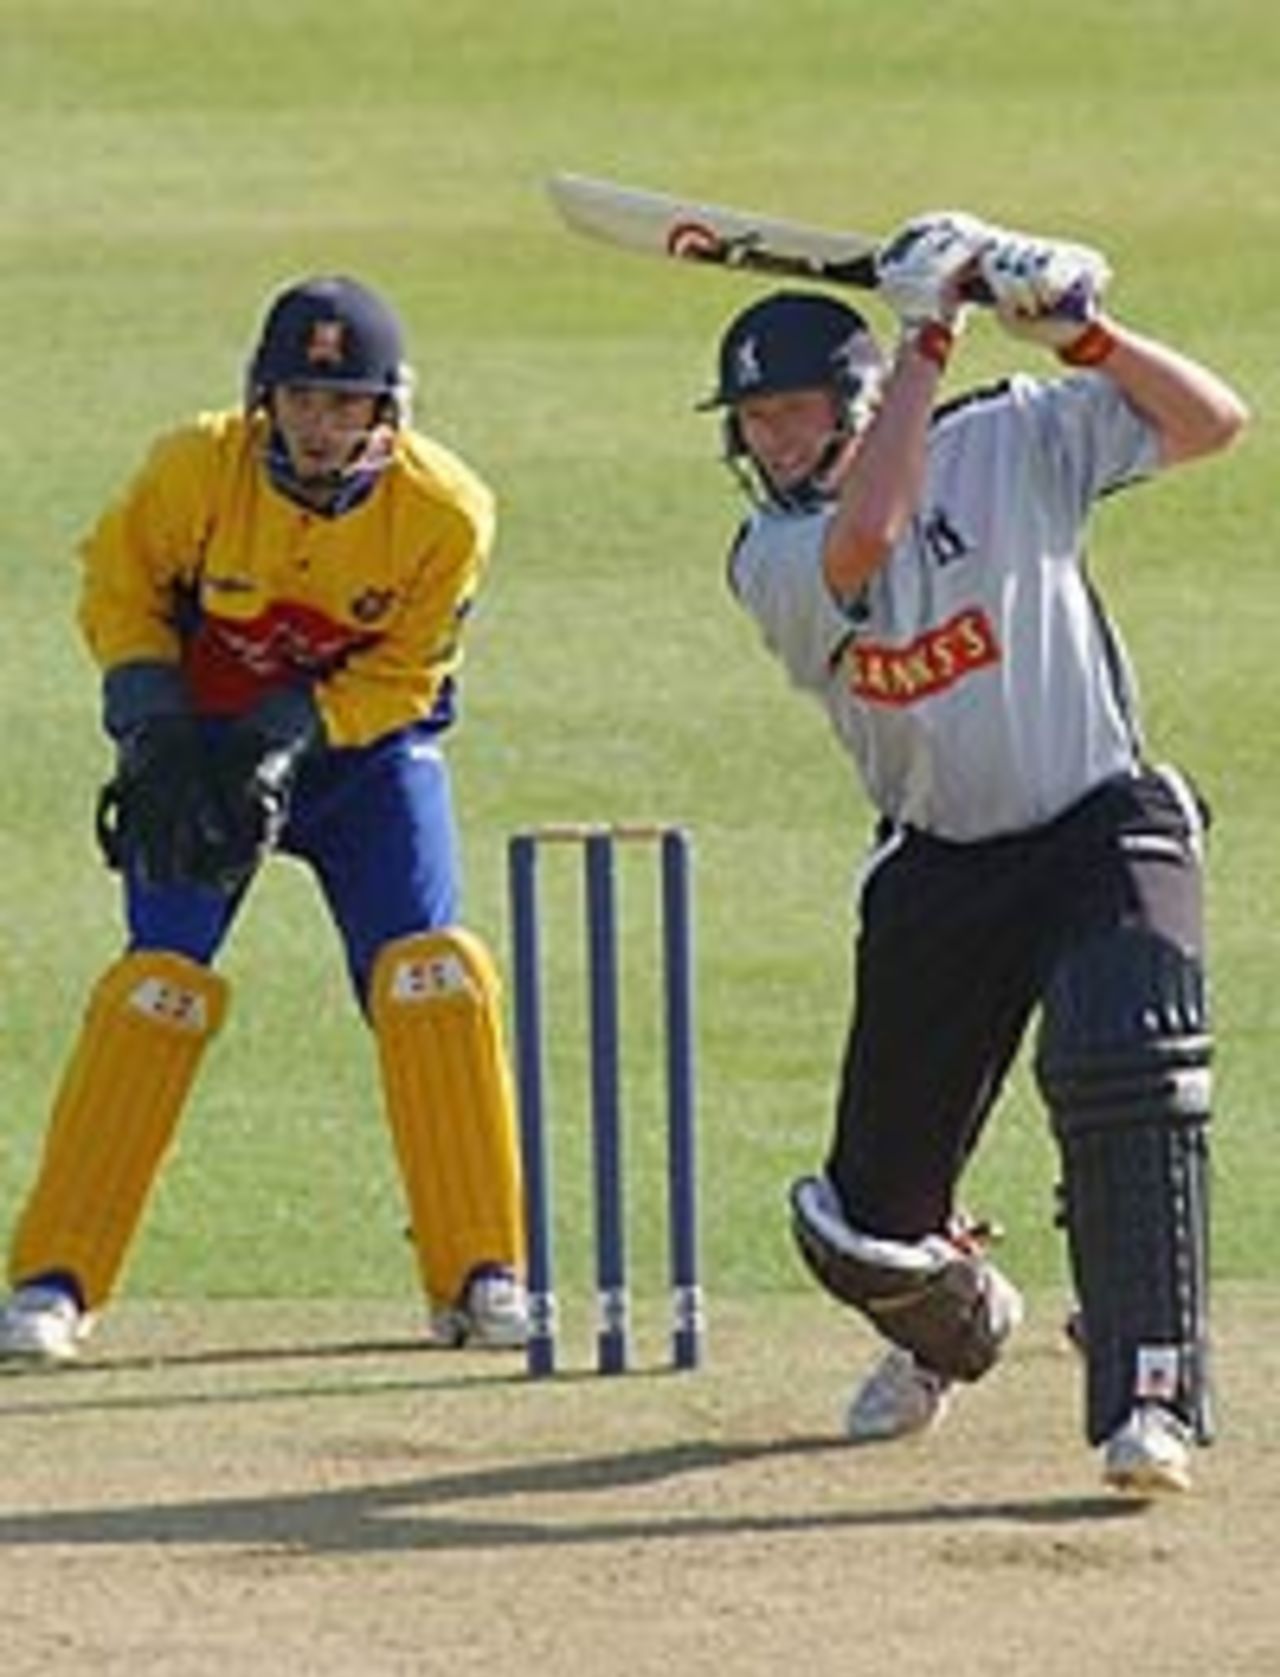 Dougie Brown hits out for Warwickshire against Essex (Nat Lge, May 18, 2003)